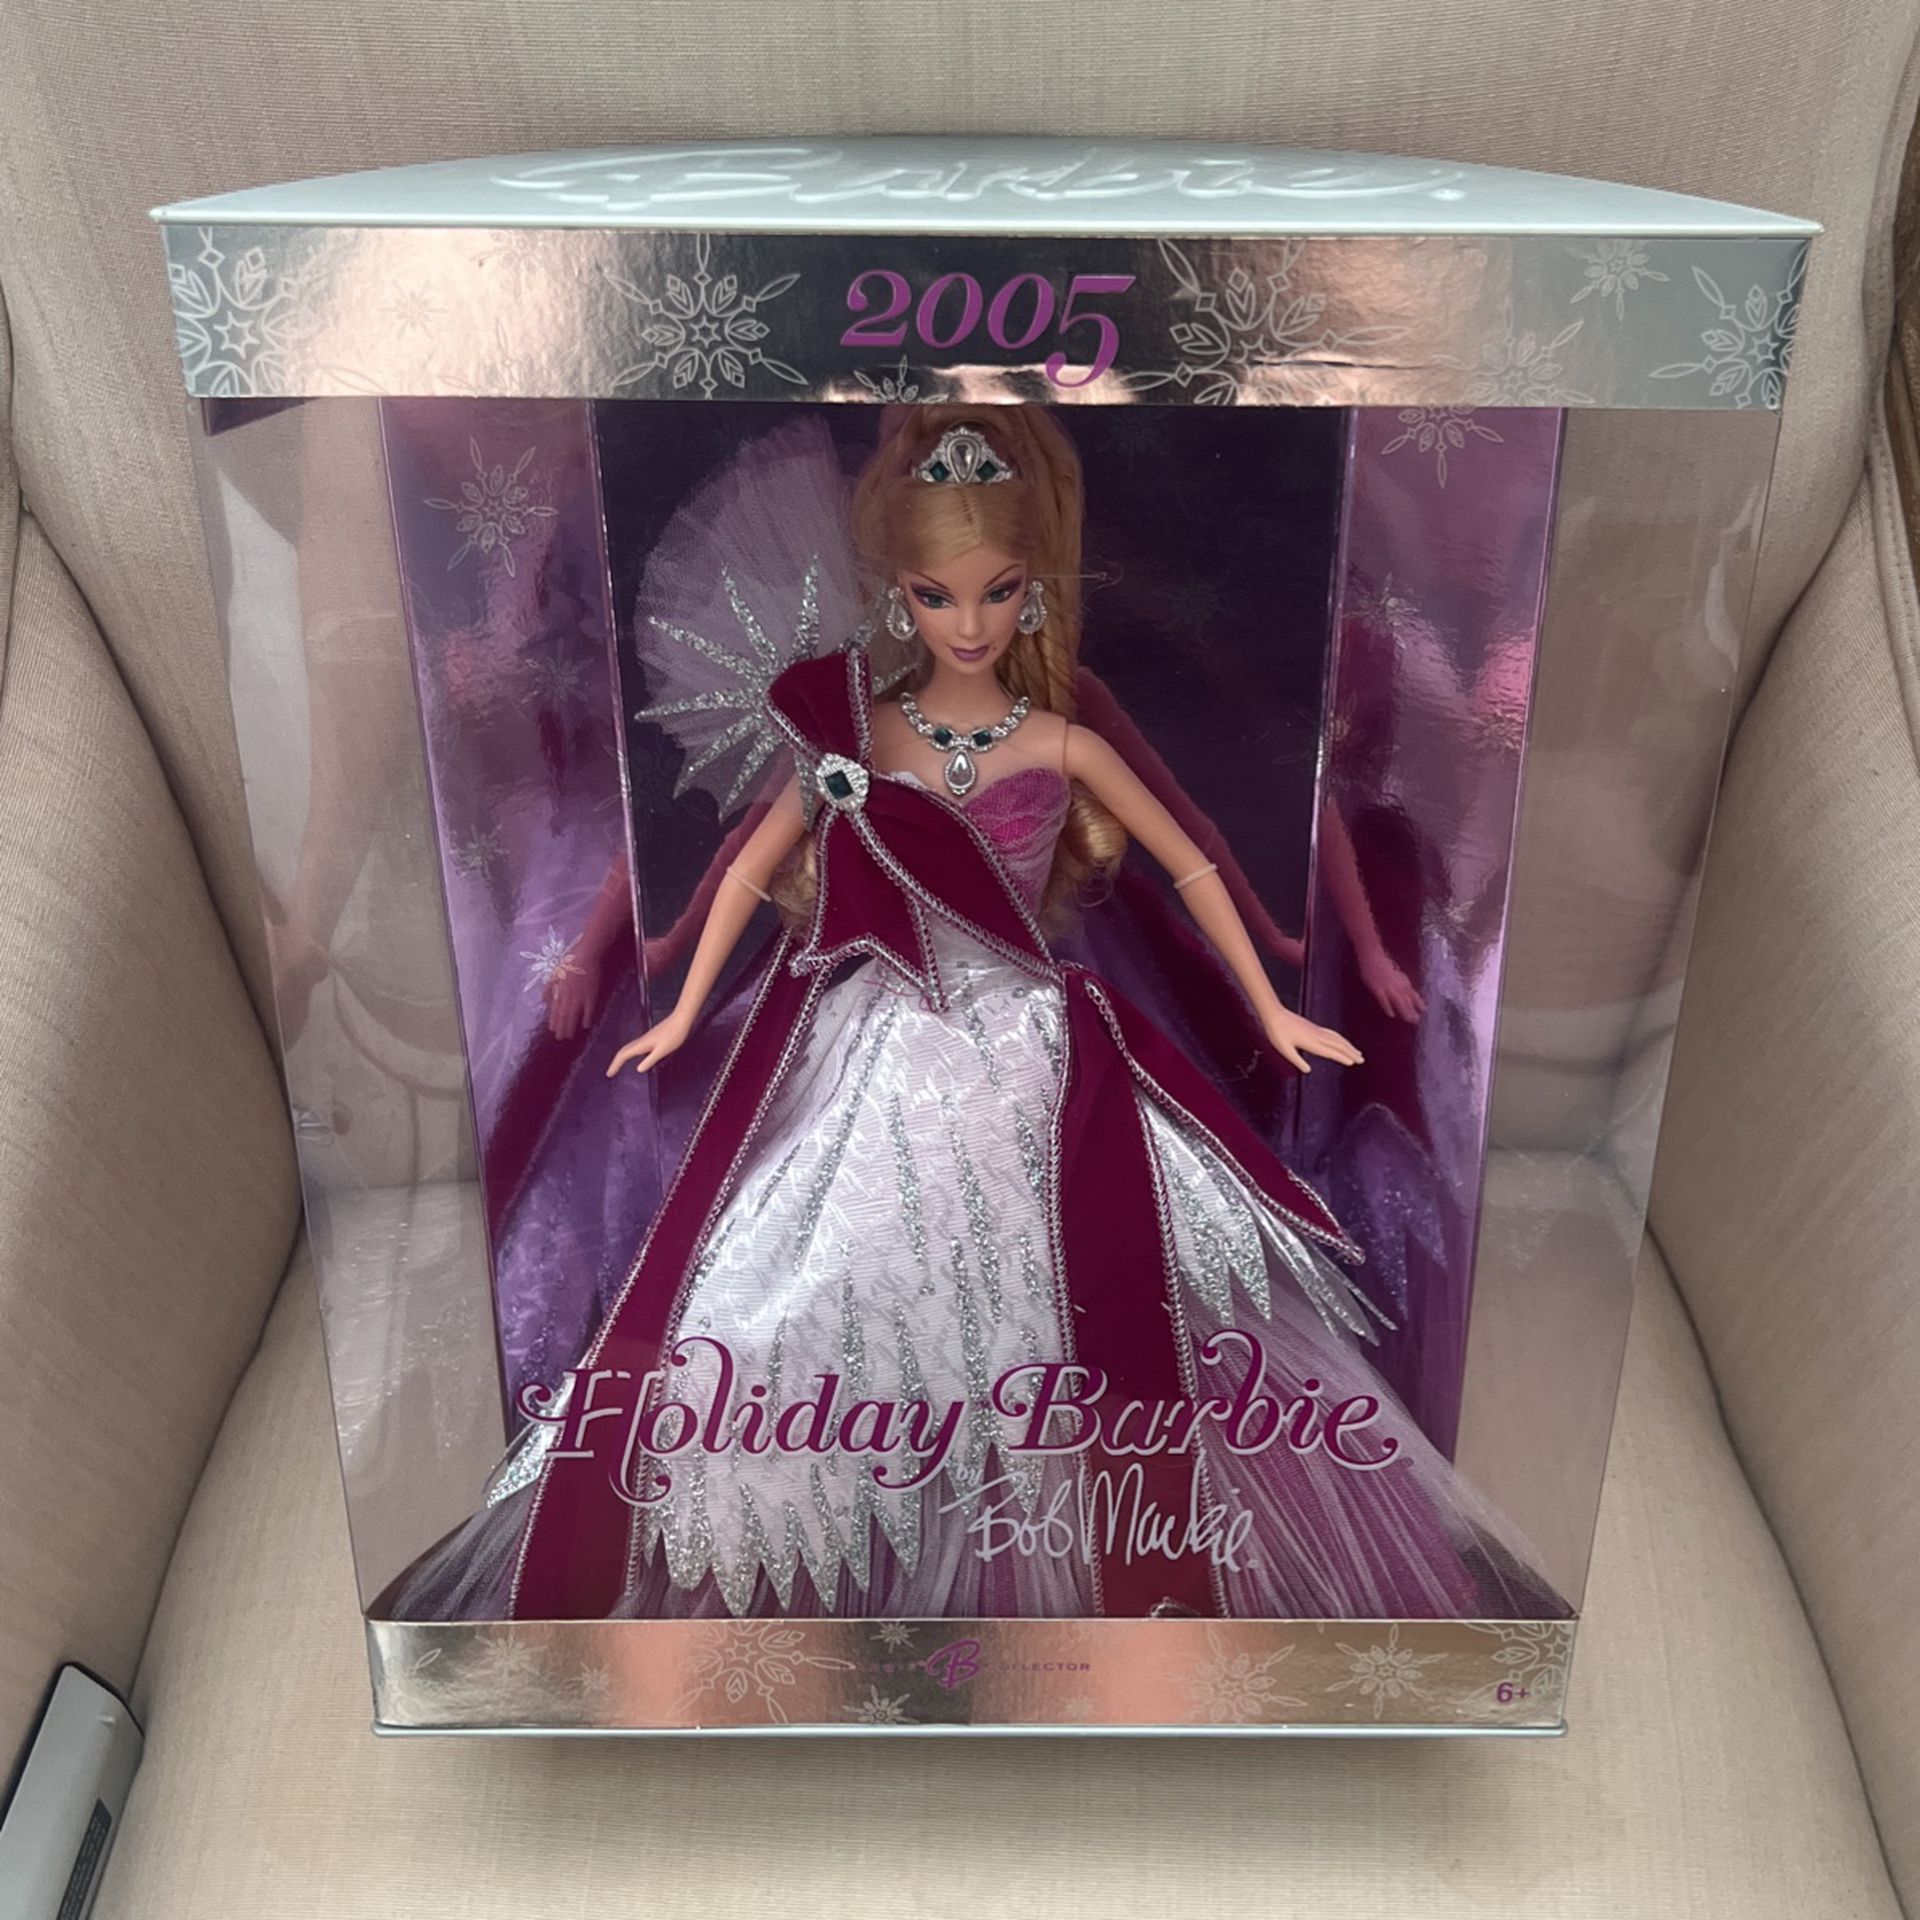 NEVER OPENED 2005 Holiday Barbie